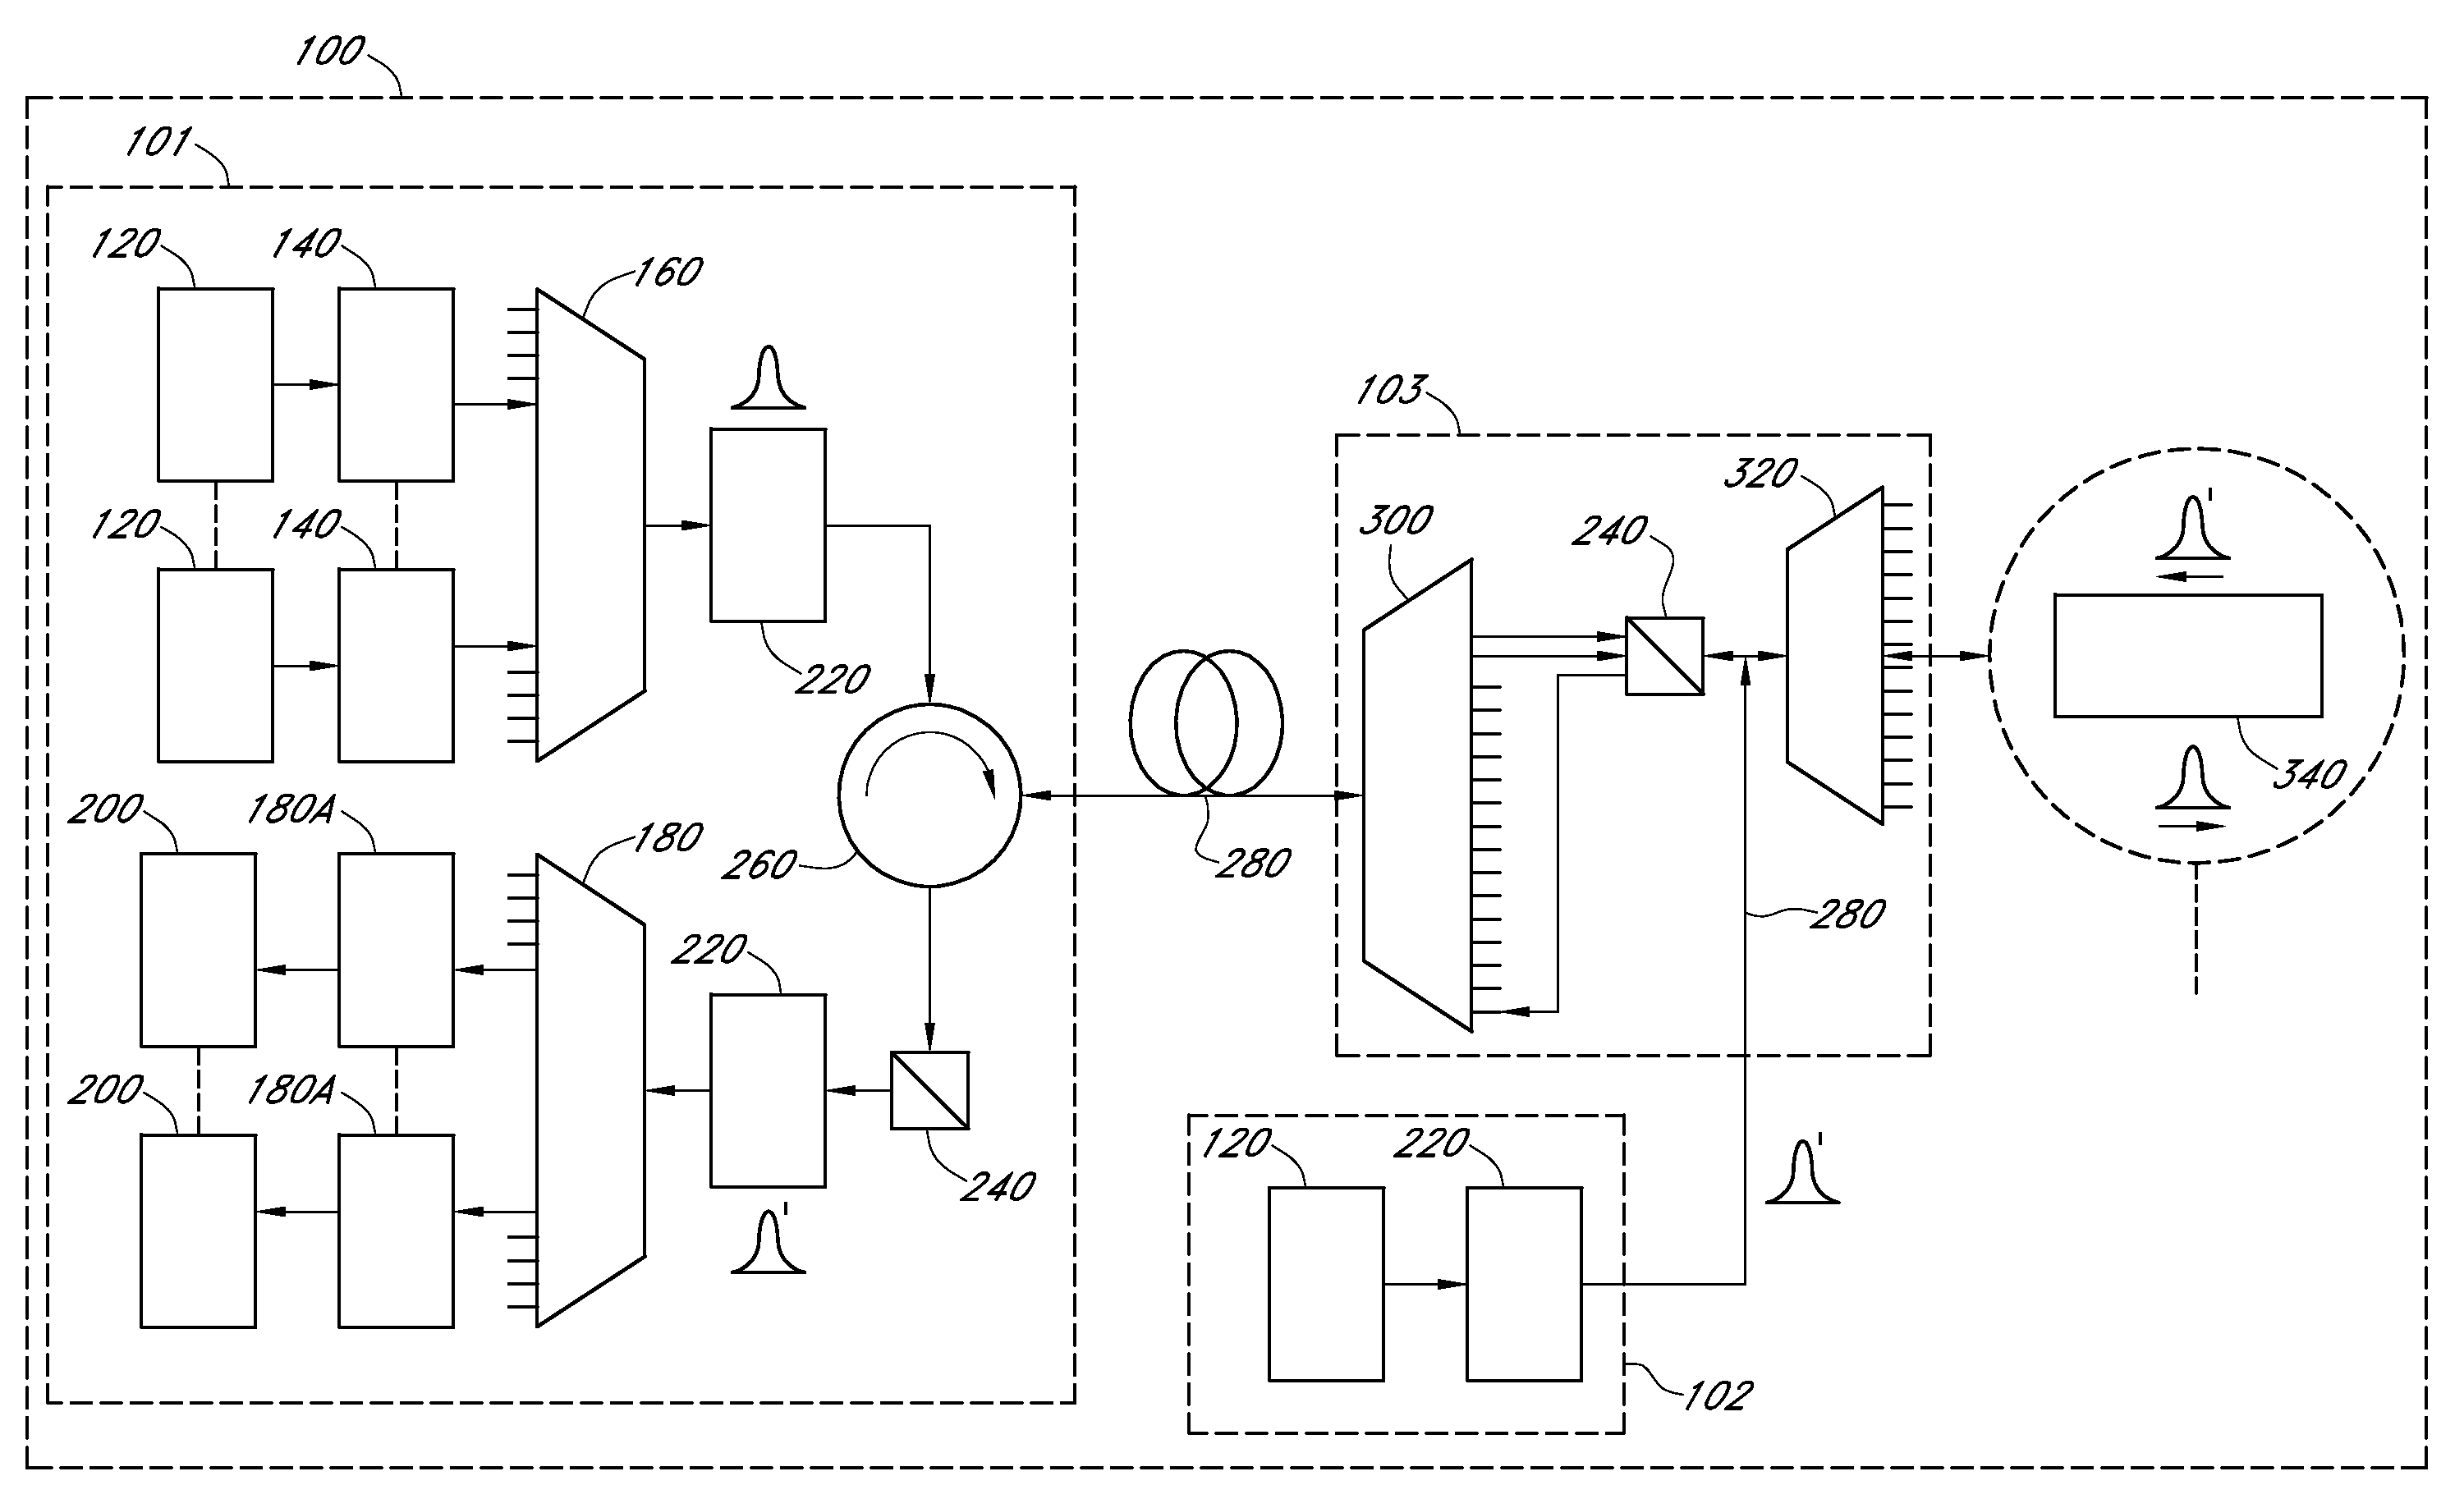 Dynamic intelligent bidirectional optical access communication system with object/intelligent appliance-to-object/intelligent appliance interaction